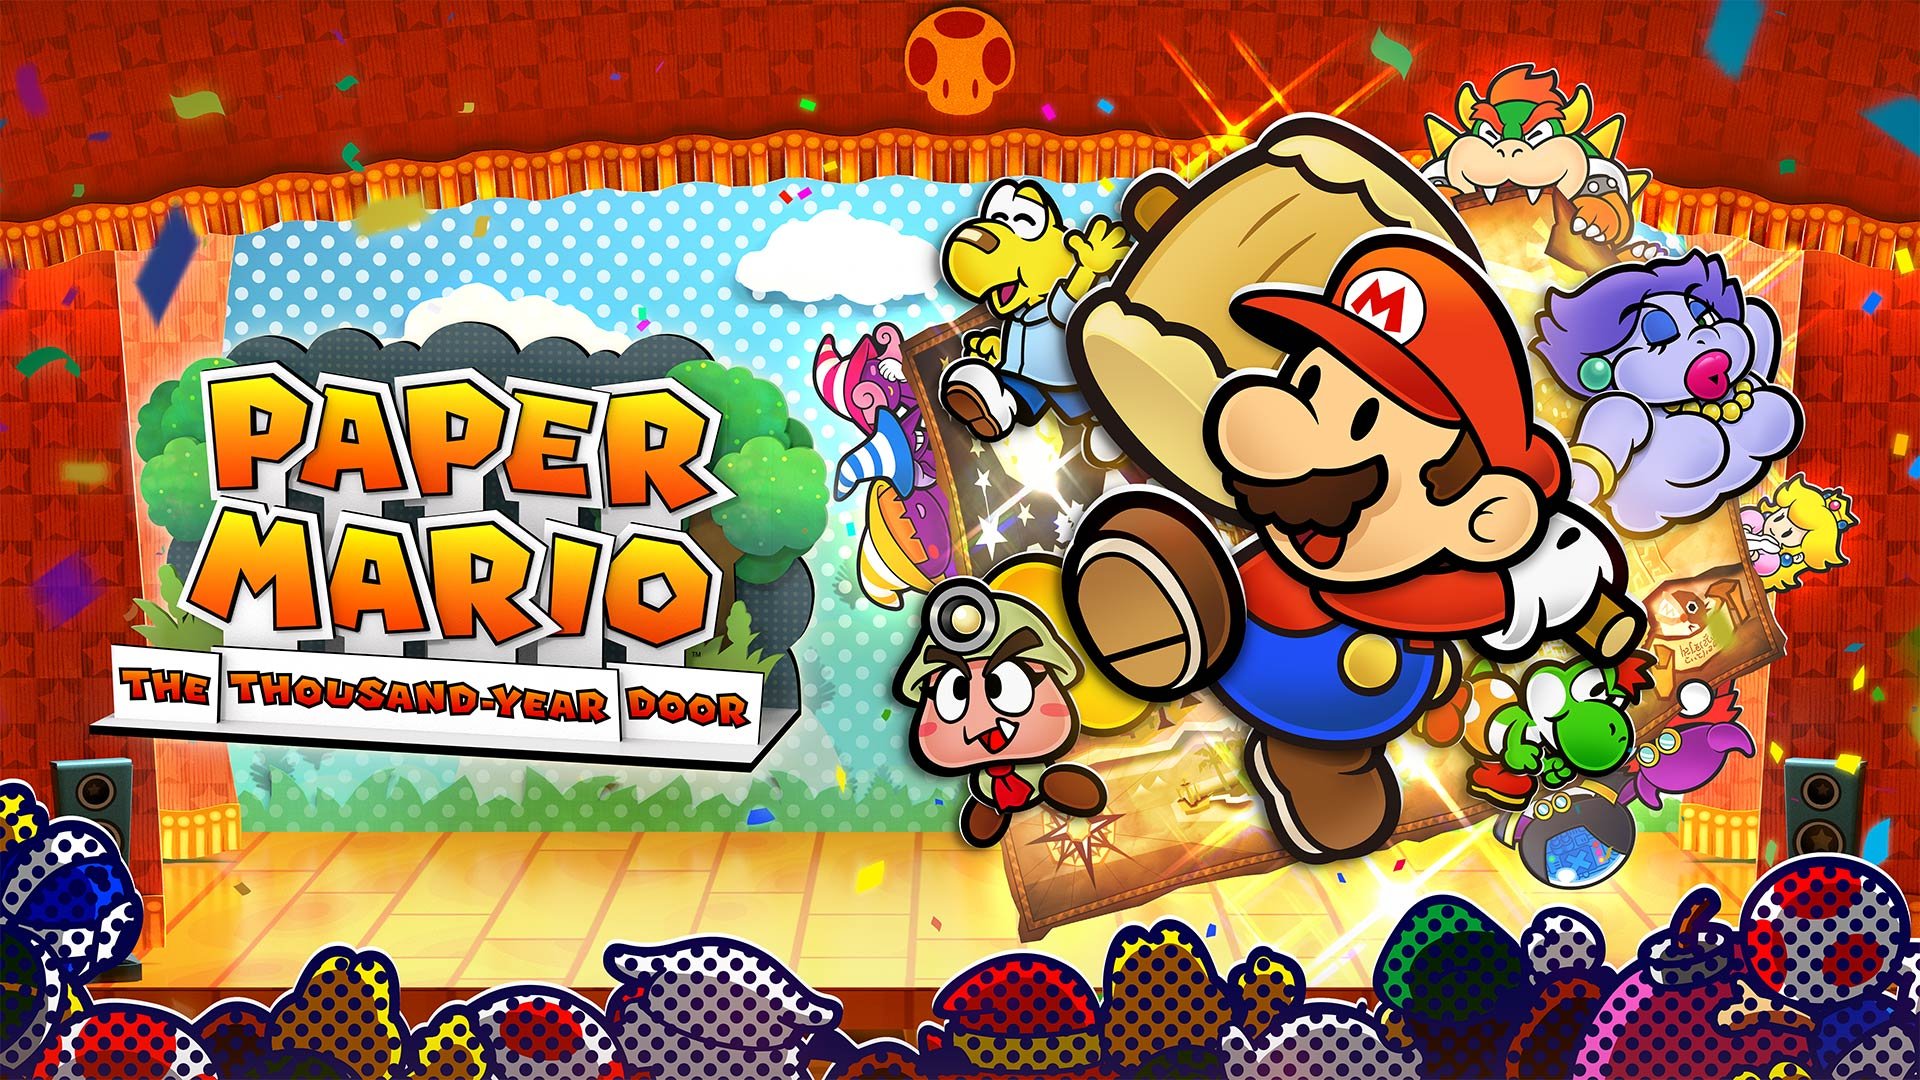 The new trailer for Paper Mario: The Thousand-Year Door shows off the game's redesigned intro